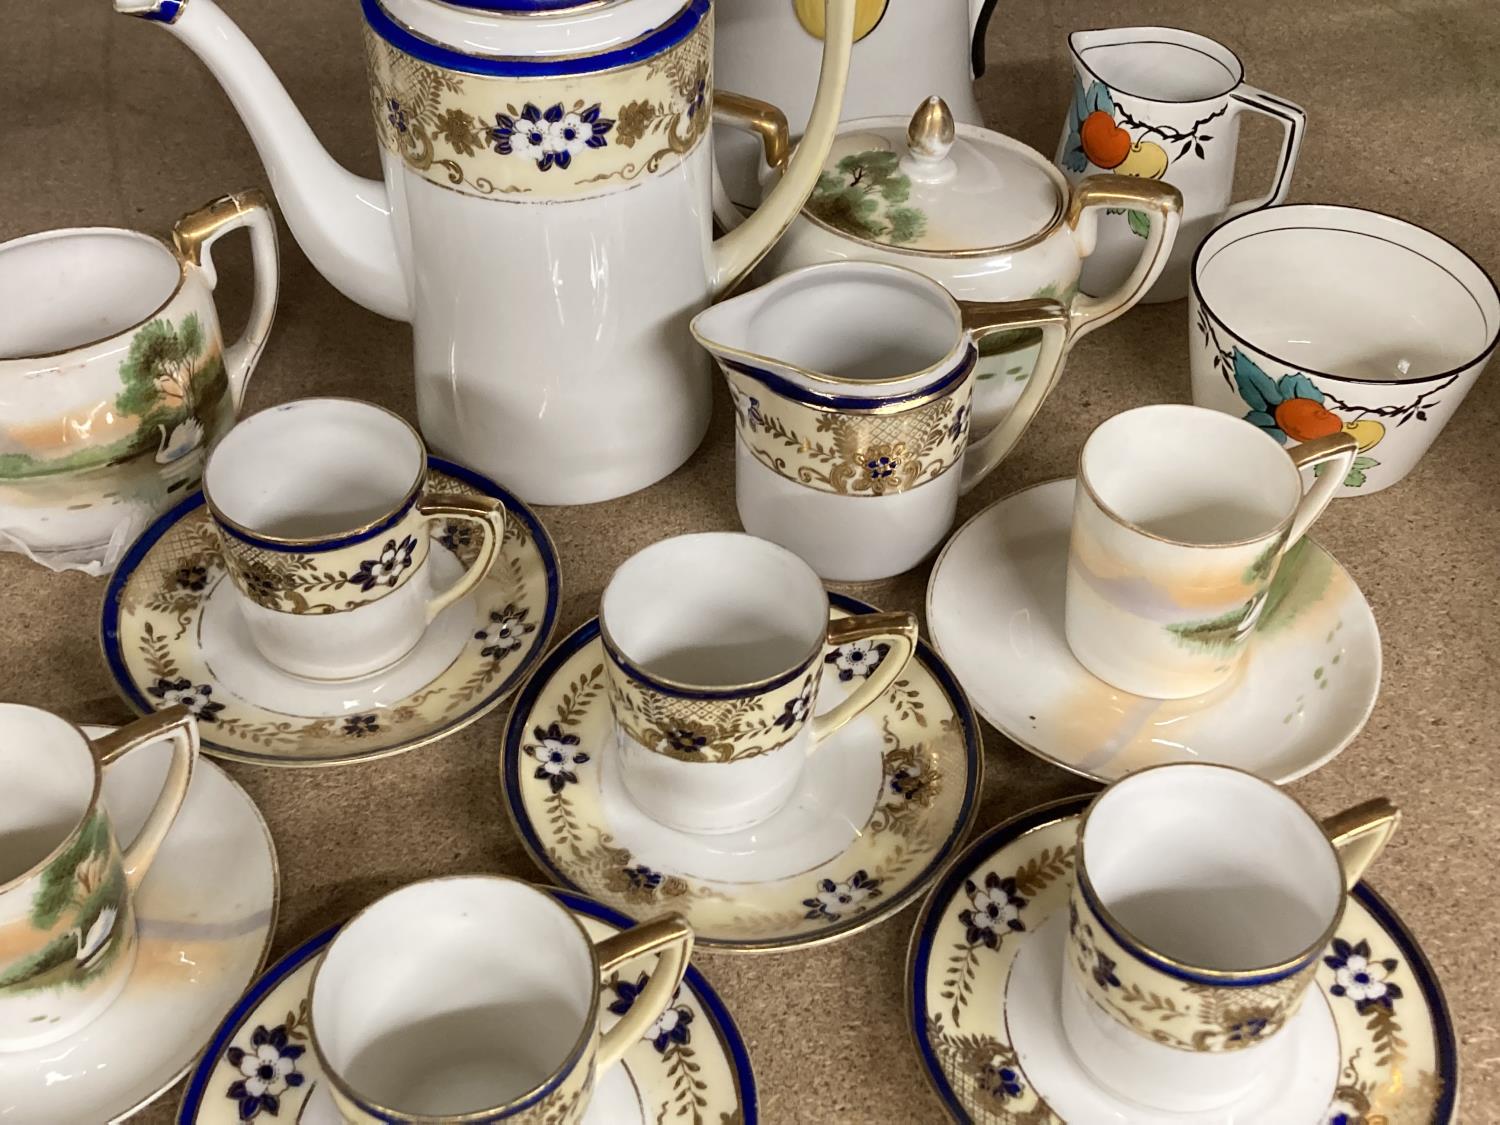 A QUANTITY OF TEAWARE TO INCLUDE A NORITAKE PART TEASET WITH COFFEE POT, CUPS, SAUCERS, CREAM JUG - Image 3 of 7